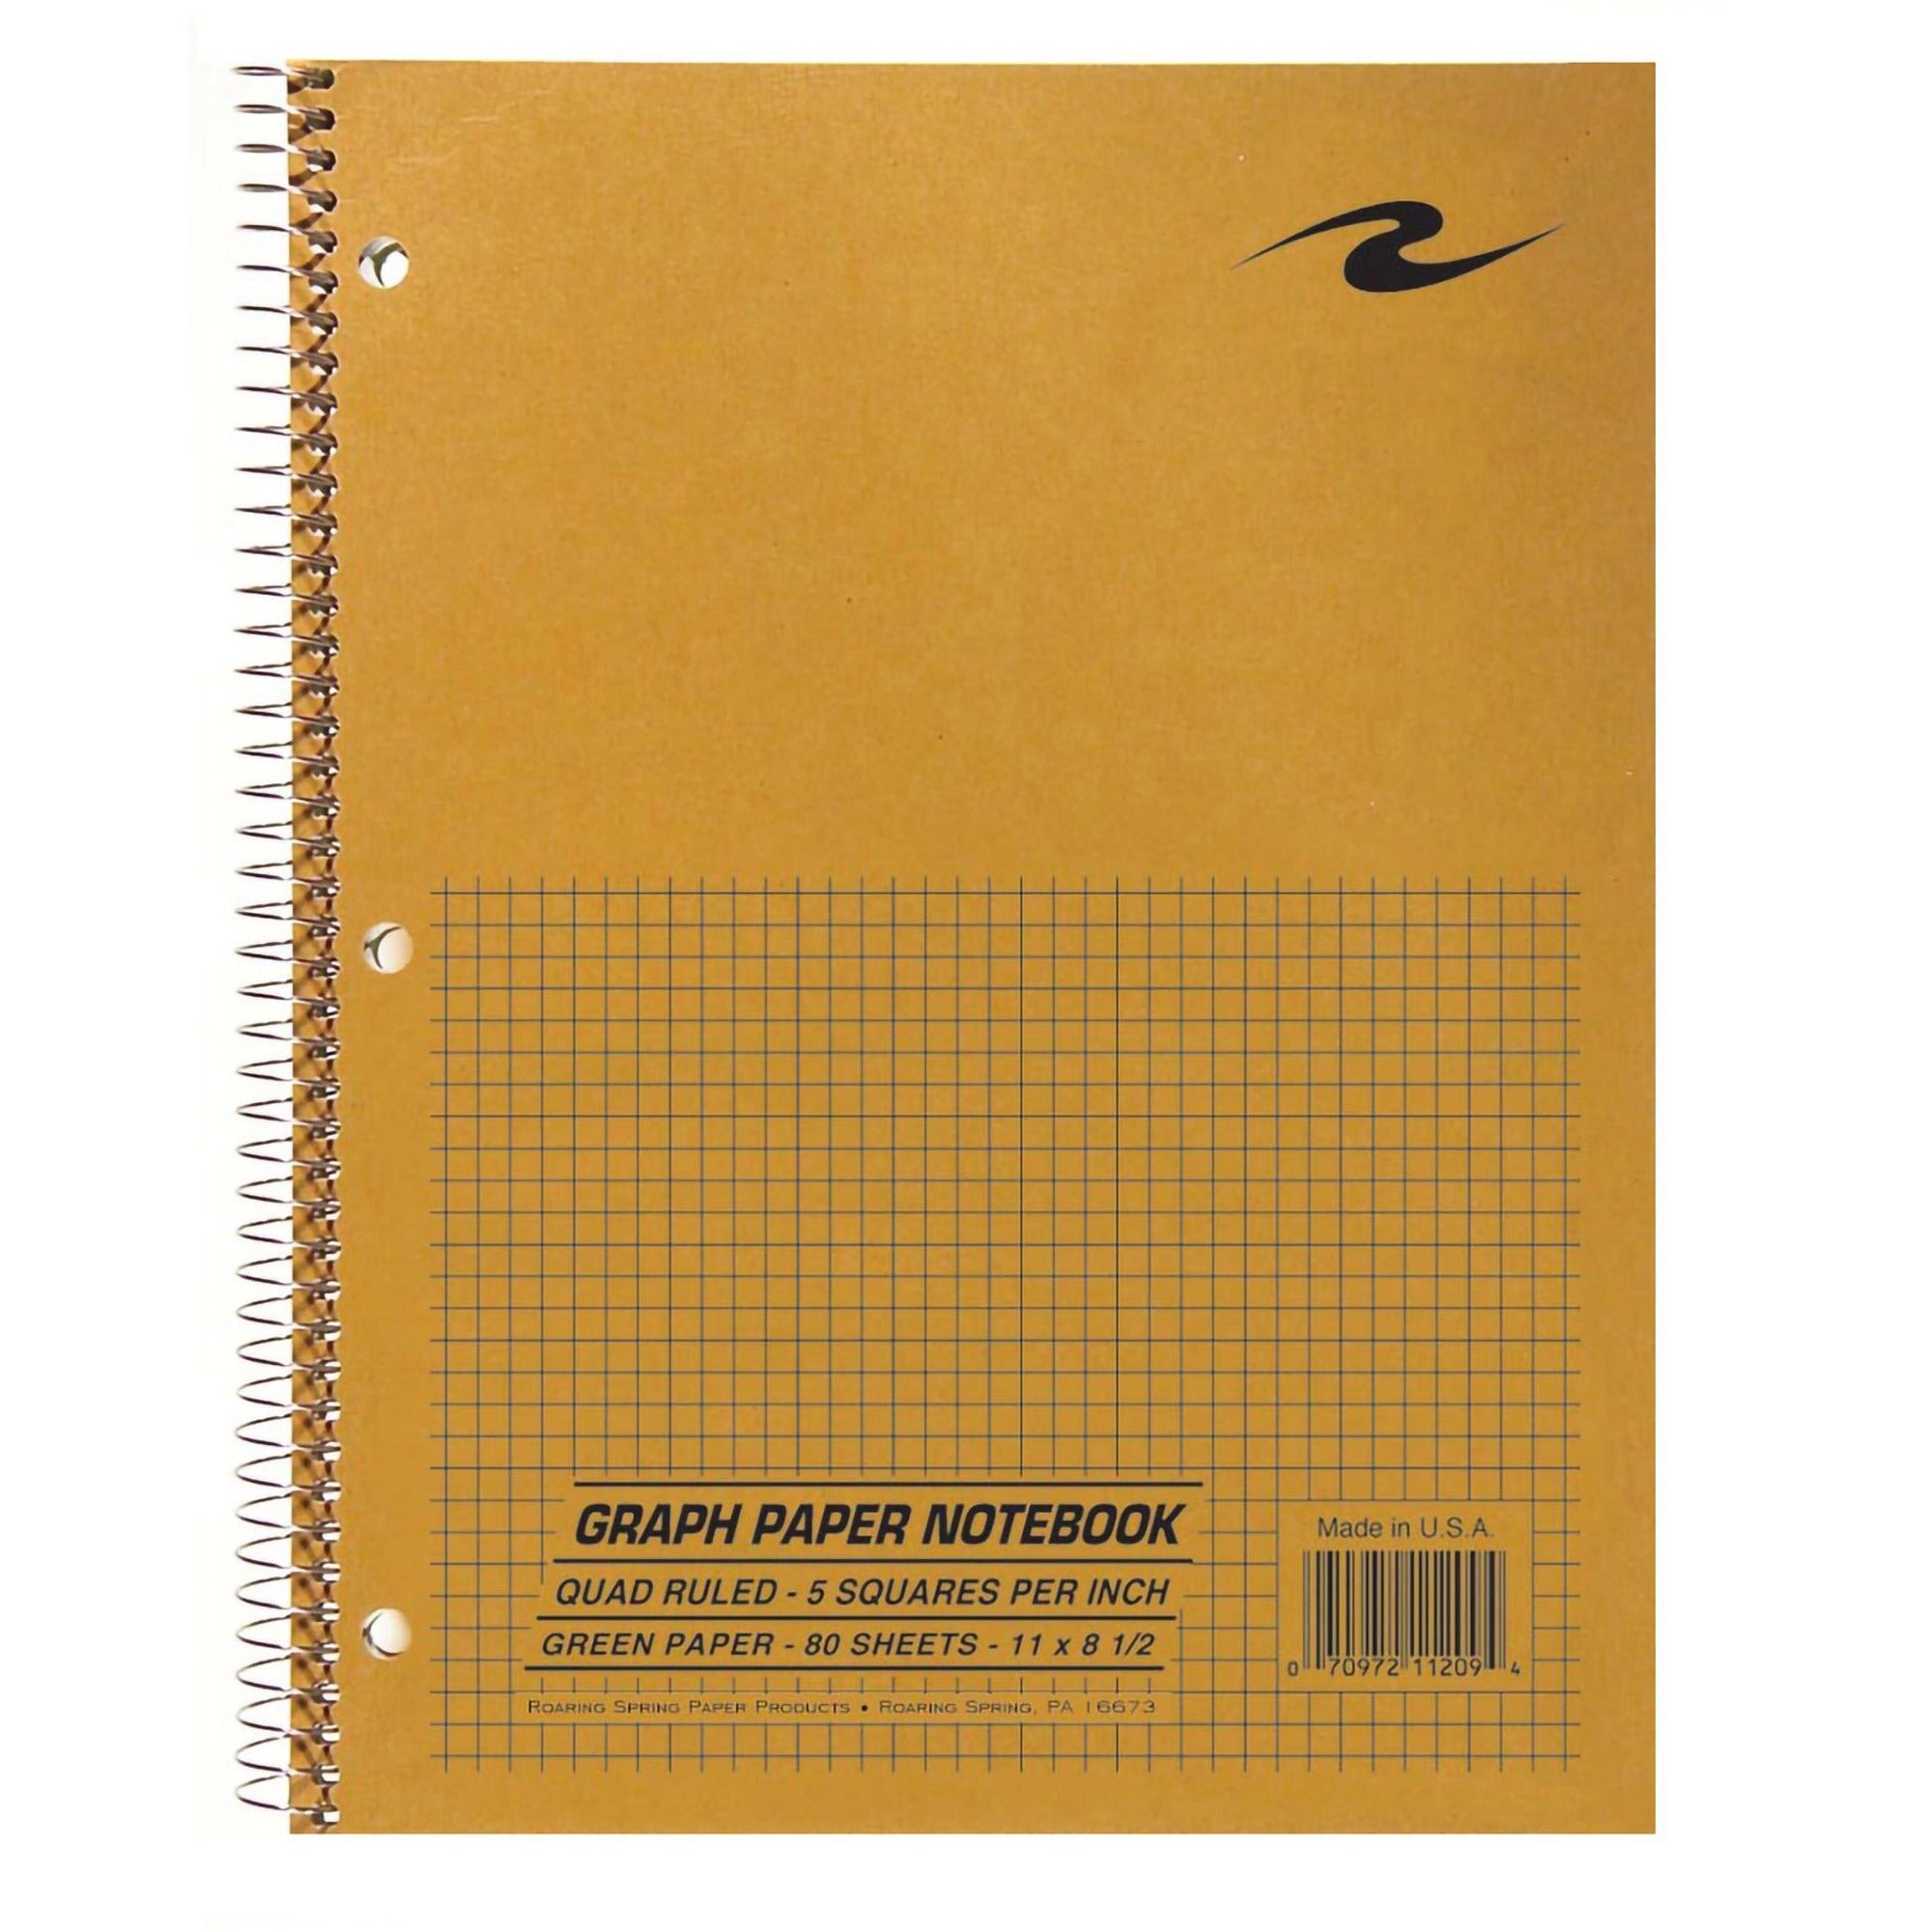 Roaring Spring 5x5 Graph Ruled Spiral Lab Notebook - 80 Sheets - 160 Pages - Printed - Spiral Bound - Both Side Ruling Surface - 3 Hole(s) - 15 lb Basis Weight - 56 g/m2 Grammage - 11" x 8 1/2" - 0.30" x 8.5" x 11" - Green Paper - 1 Each - 